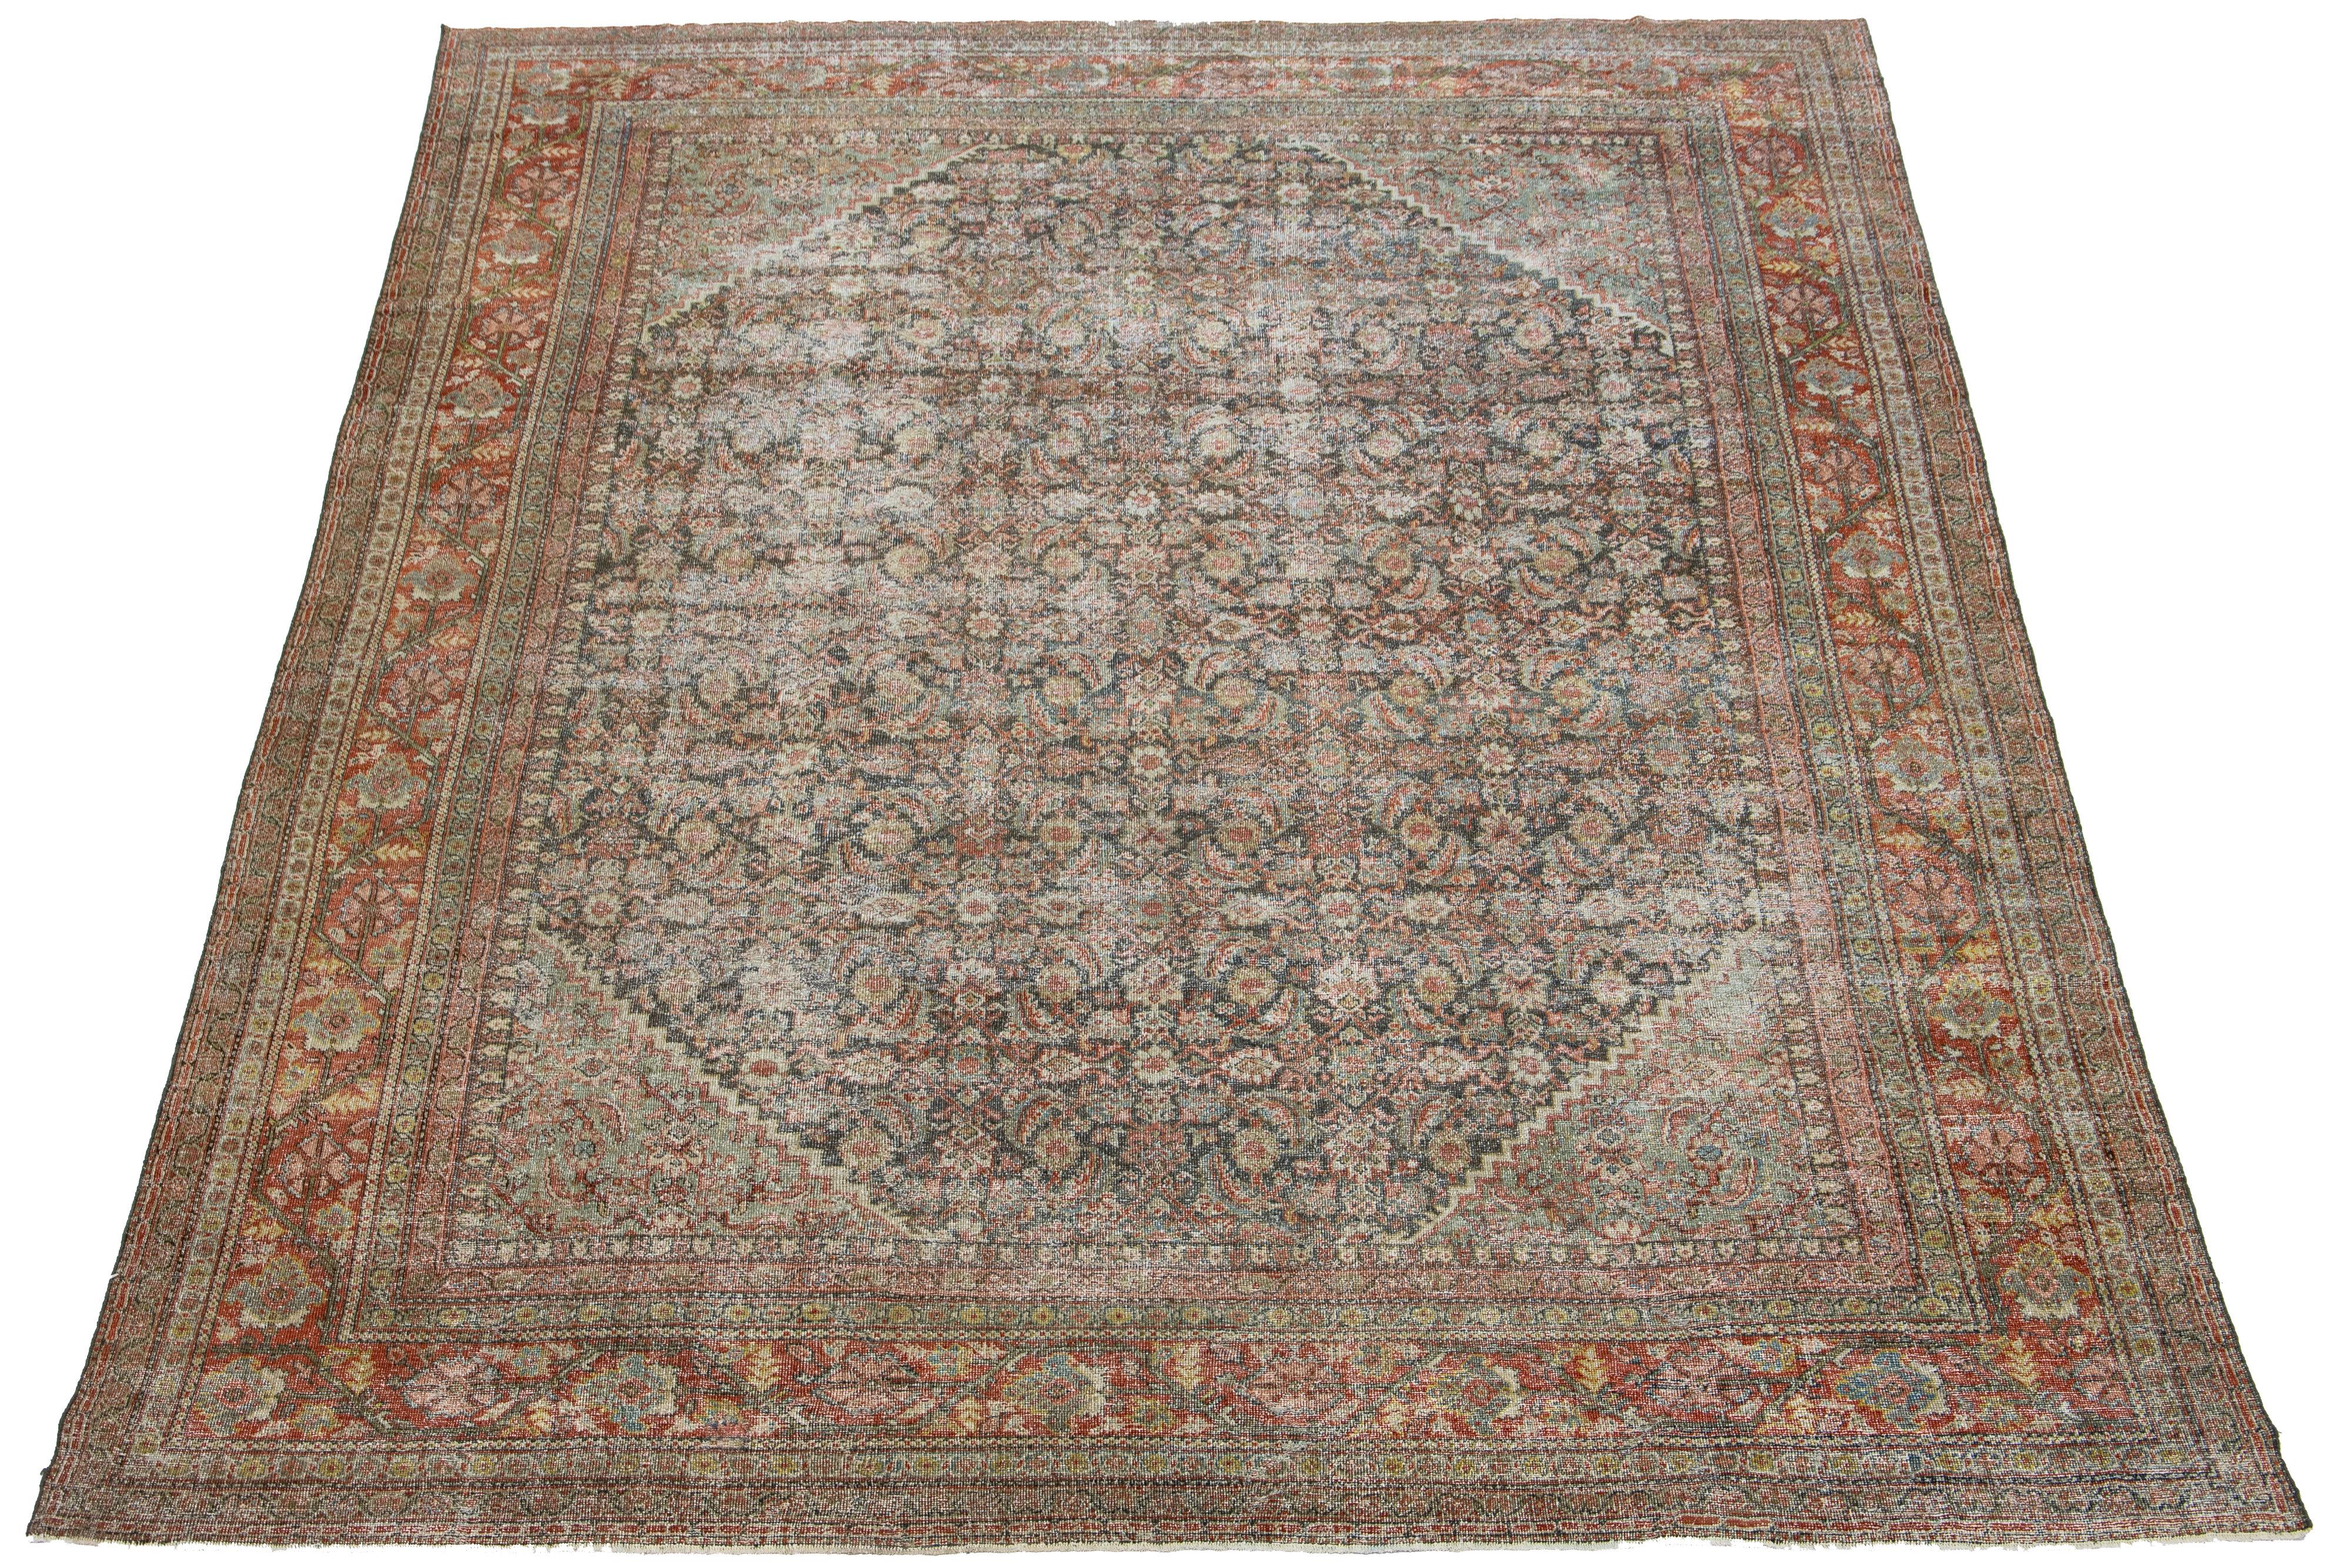 Beautiful antique hand-knotted Mahal wool rug with a blue field. It features terracotta, red, and yellow accents in an all-over floral design.

This rug measures 10'3